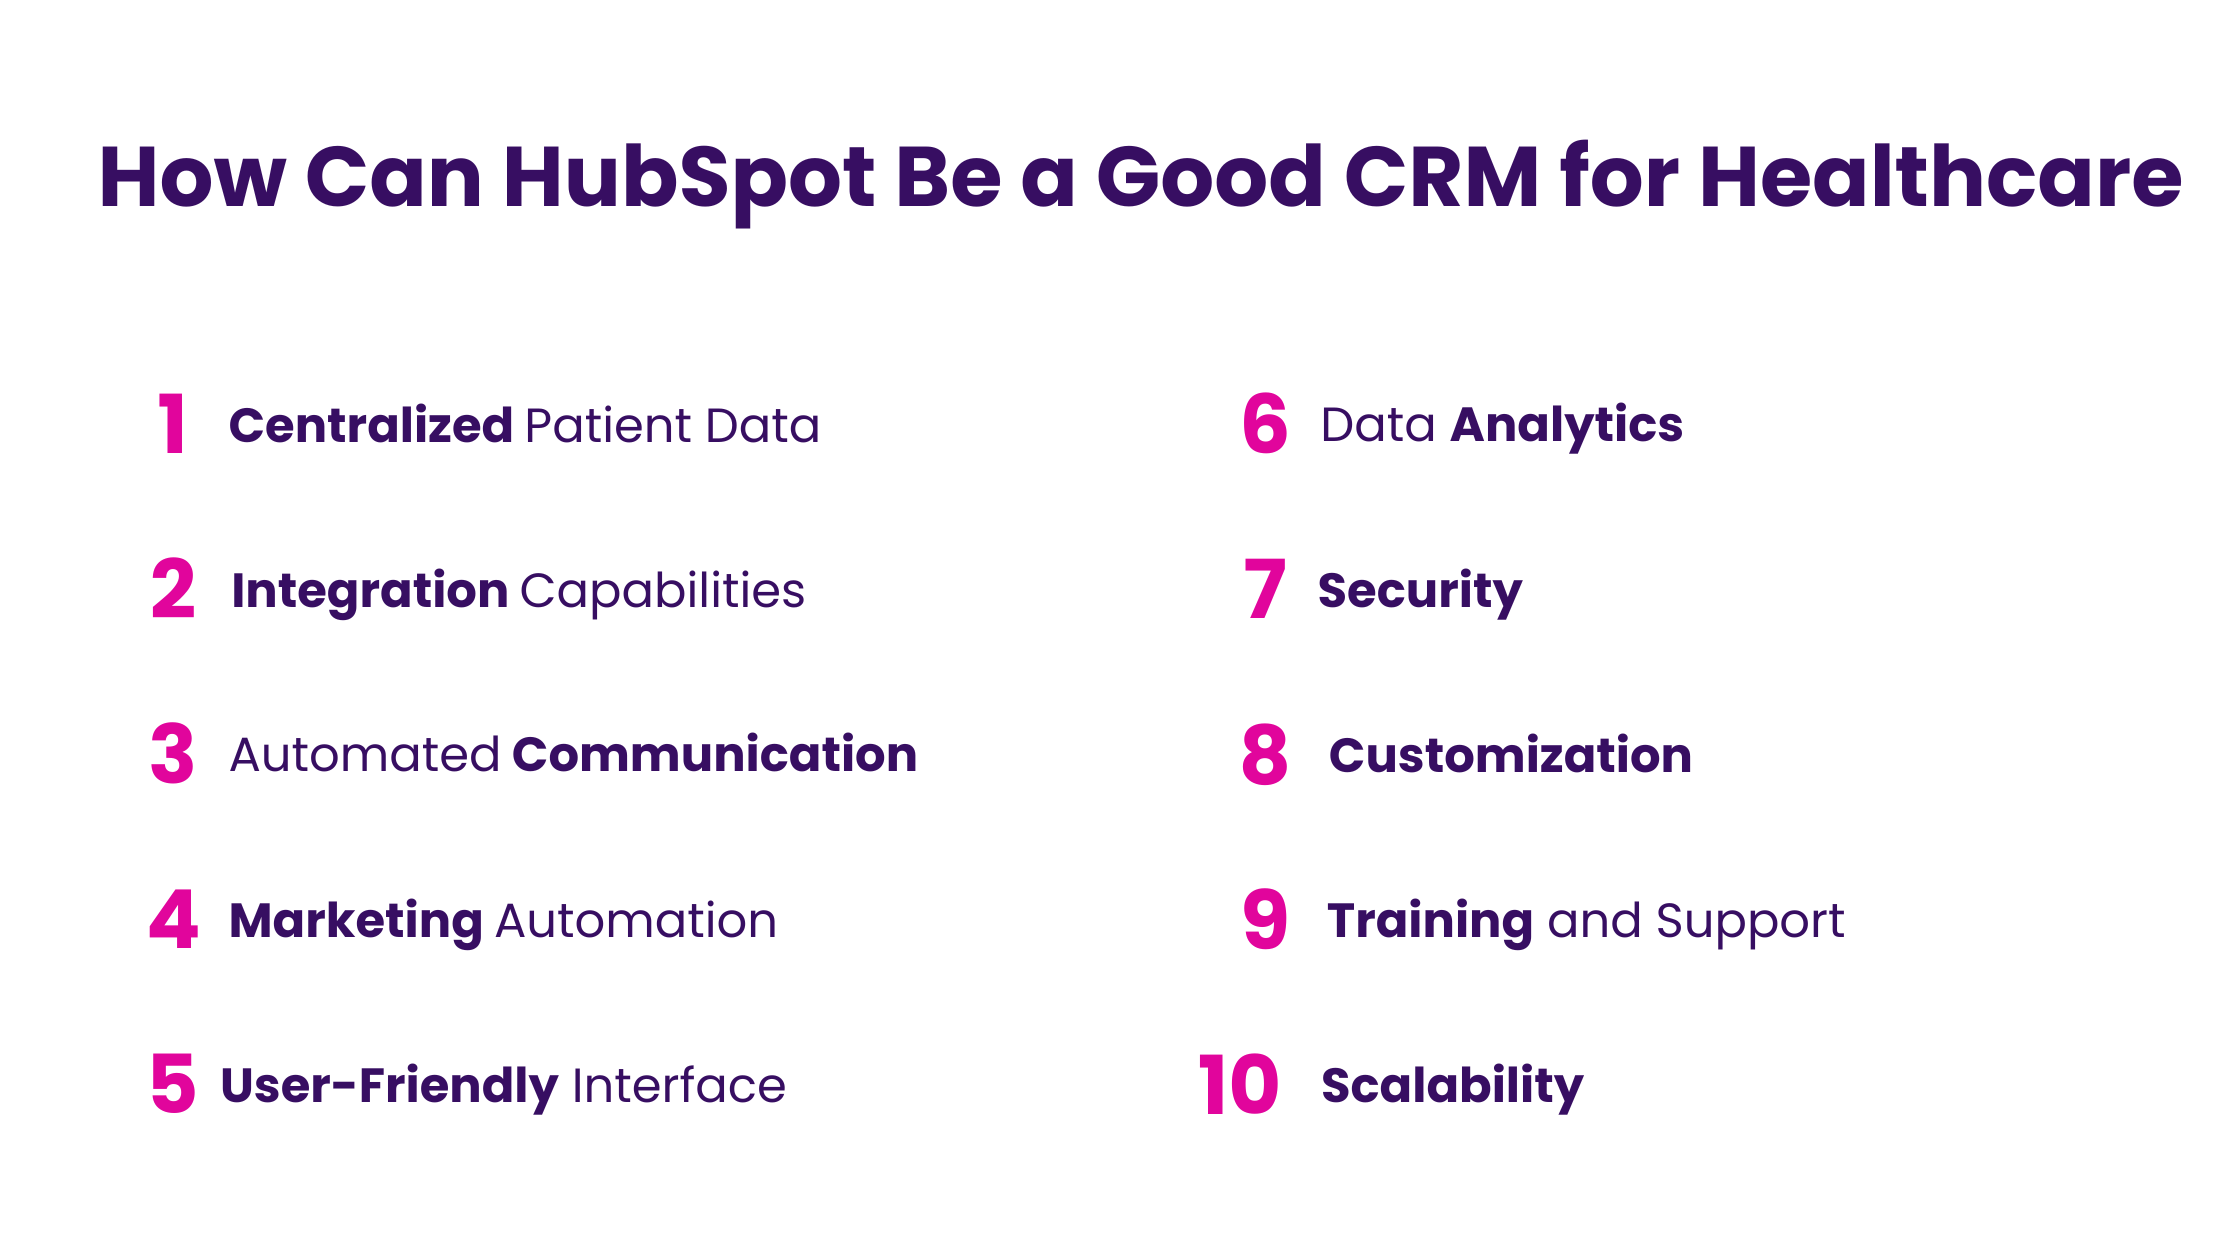 How Can HubSpot Be a Good CRM for Healthcare